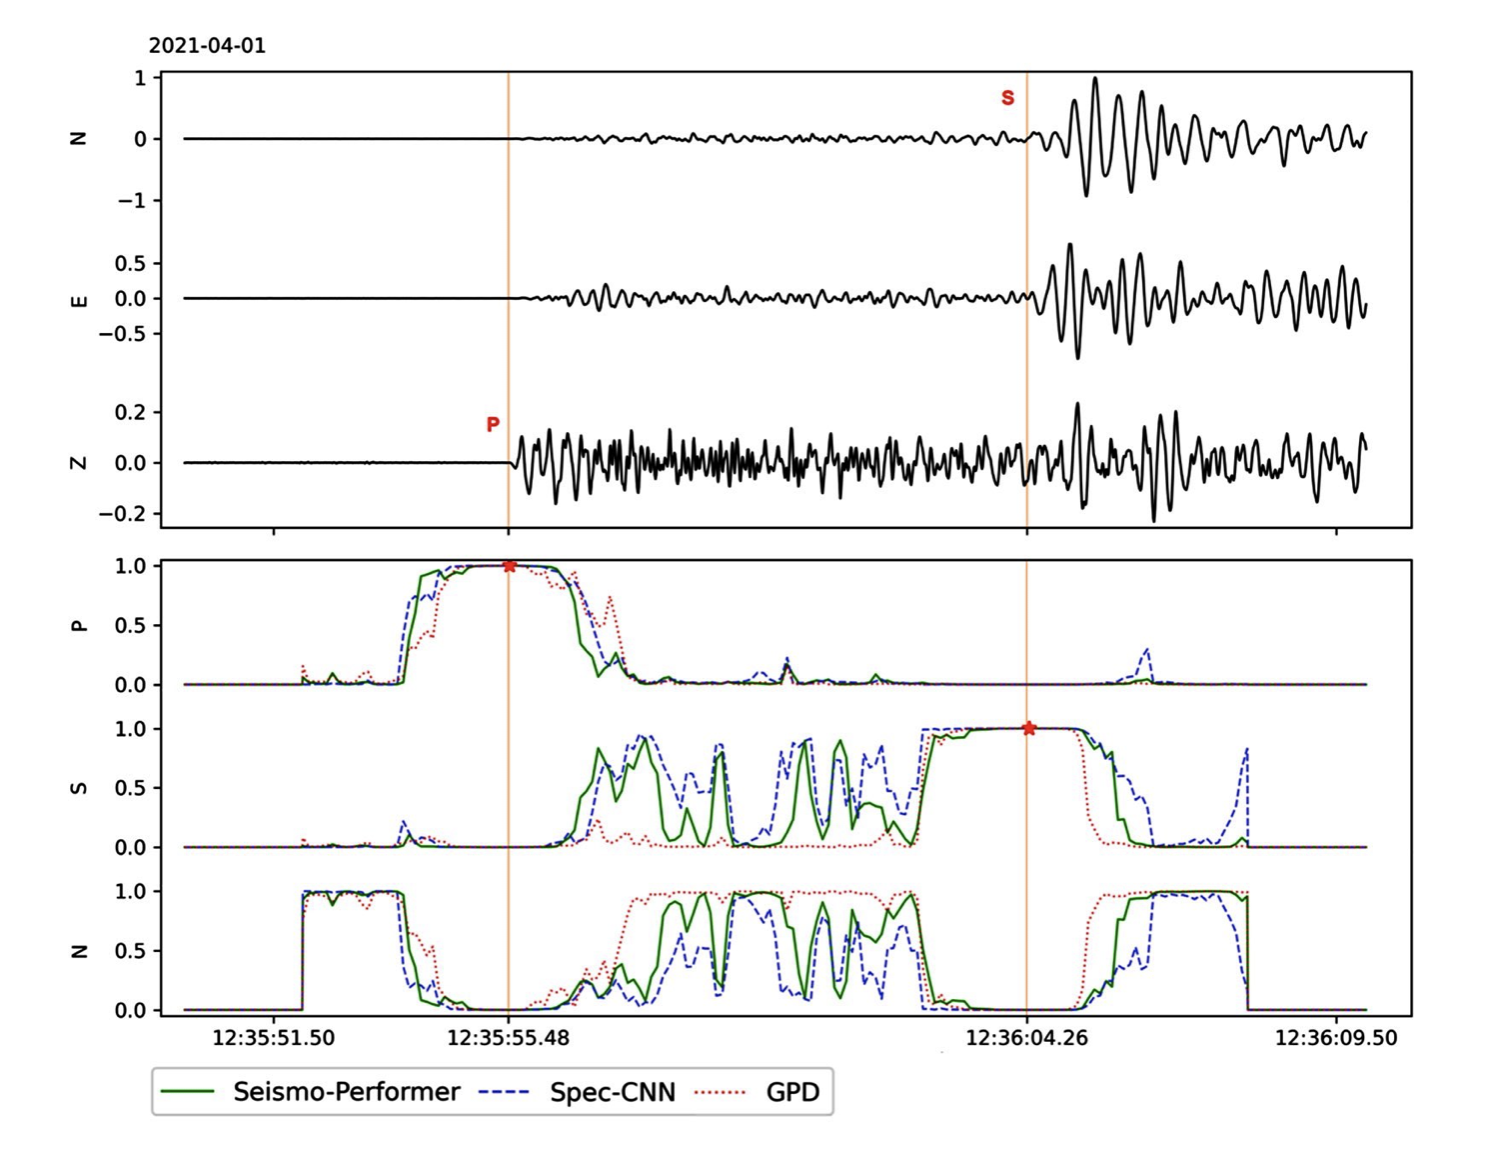 Stepnov, A.; Chernykh, V.; Konovalov, A. The Seismo-Performer: A Novel Machine Learning Approach for General and Efficient Seismic Phase Recognition from Local Earthquakes in Real Time. Sensors 2021, 21, 6290. https://doi.org/10.3390/s21186290